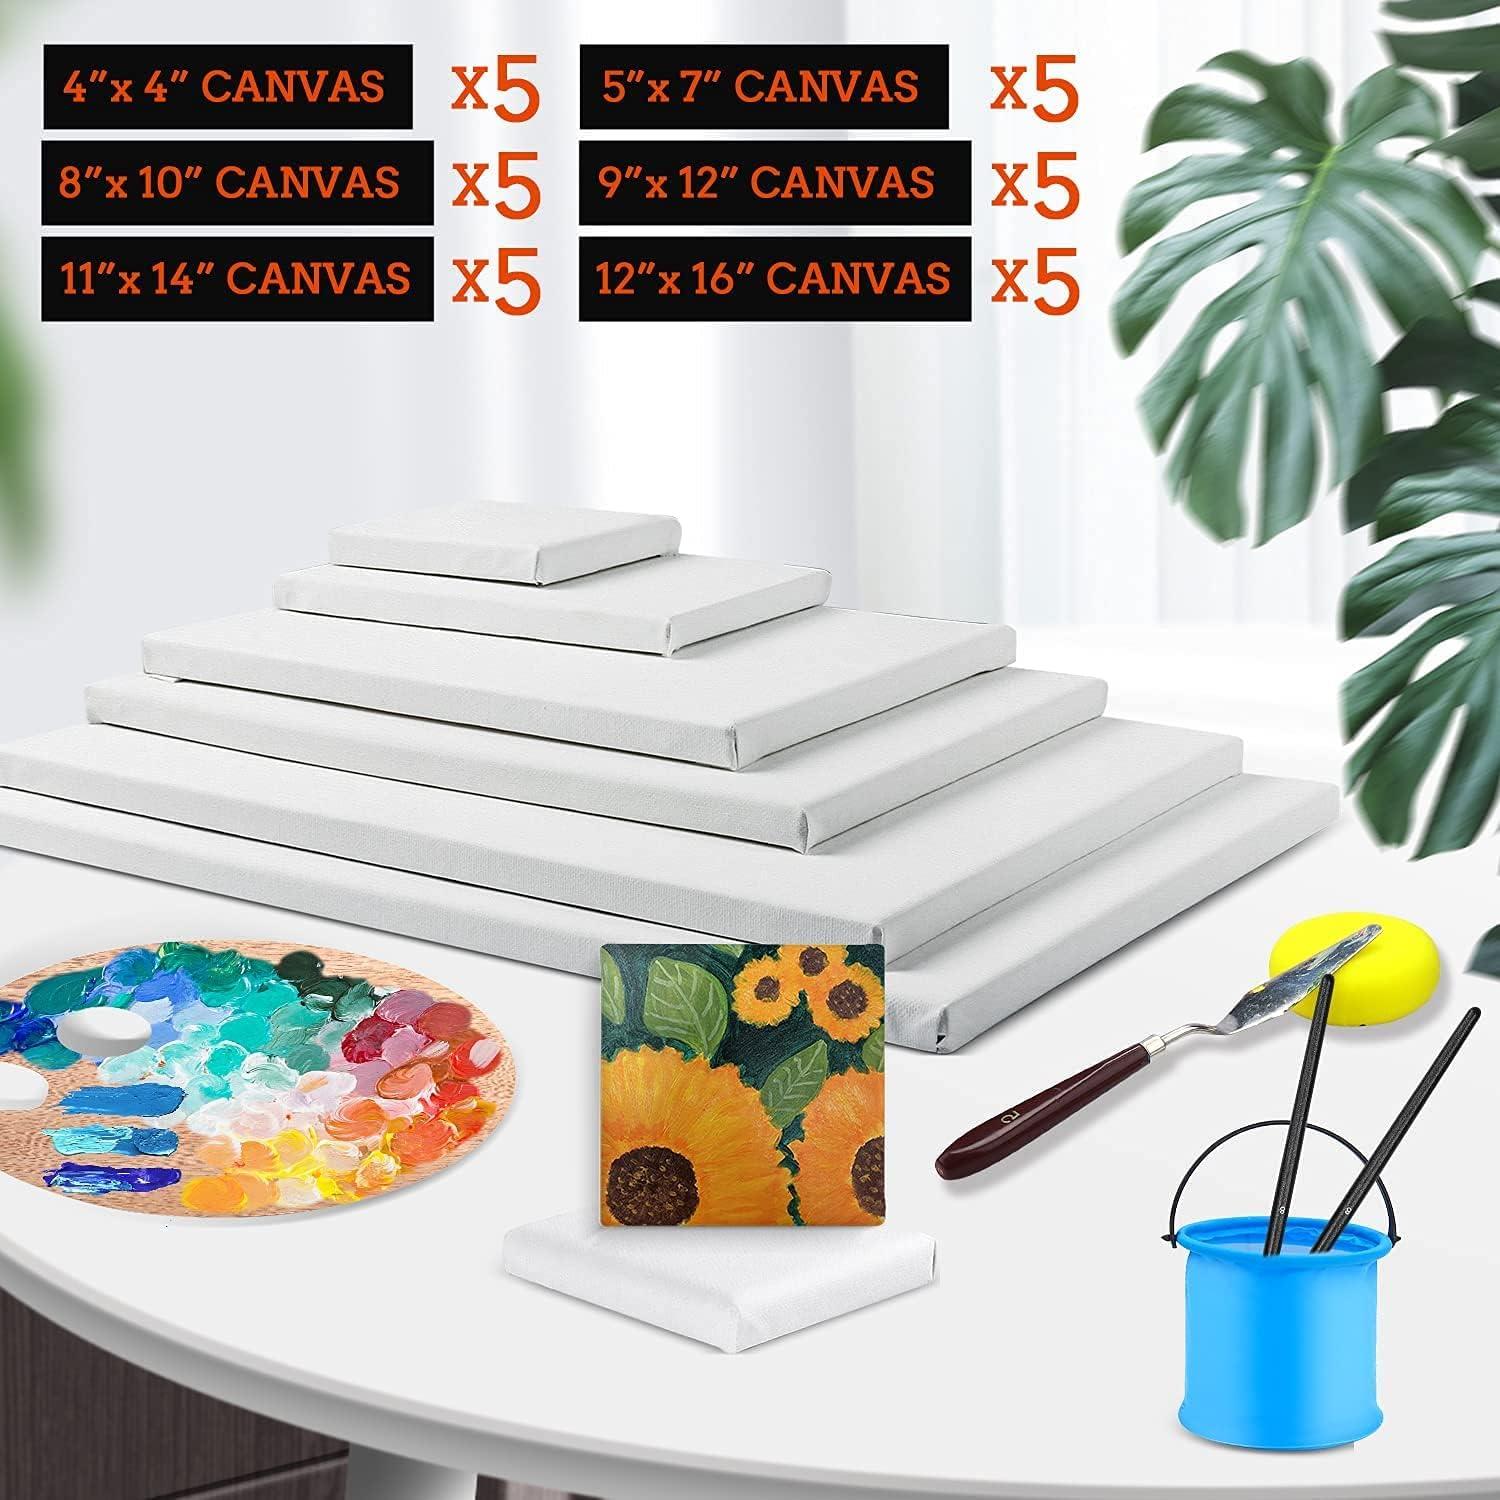 Canvases for Painting, Painting Supplies with 20 Cotton Canvas Panels, 4x4,  5x7, 8x10, 9x12, 11x14 inches (4 of Each), with 24 Acrylic Paints, 10